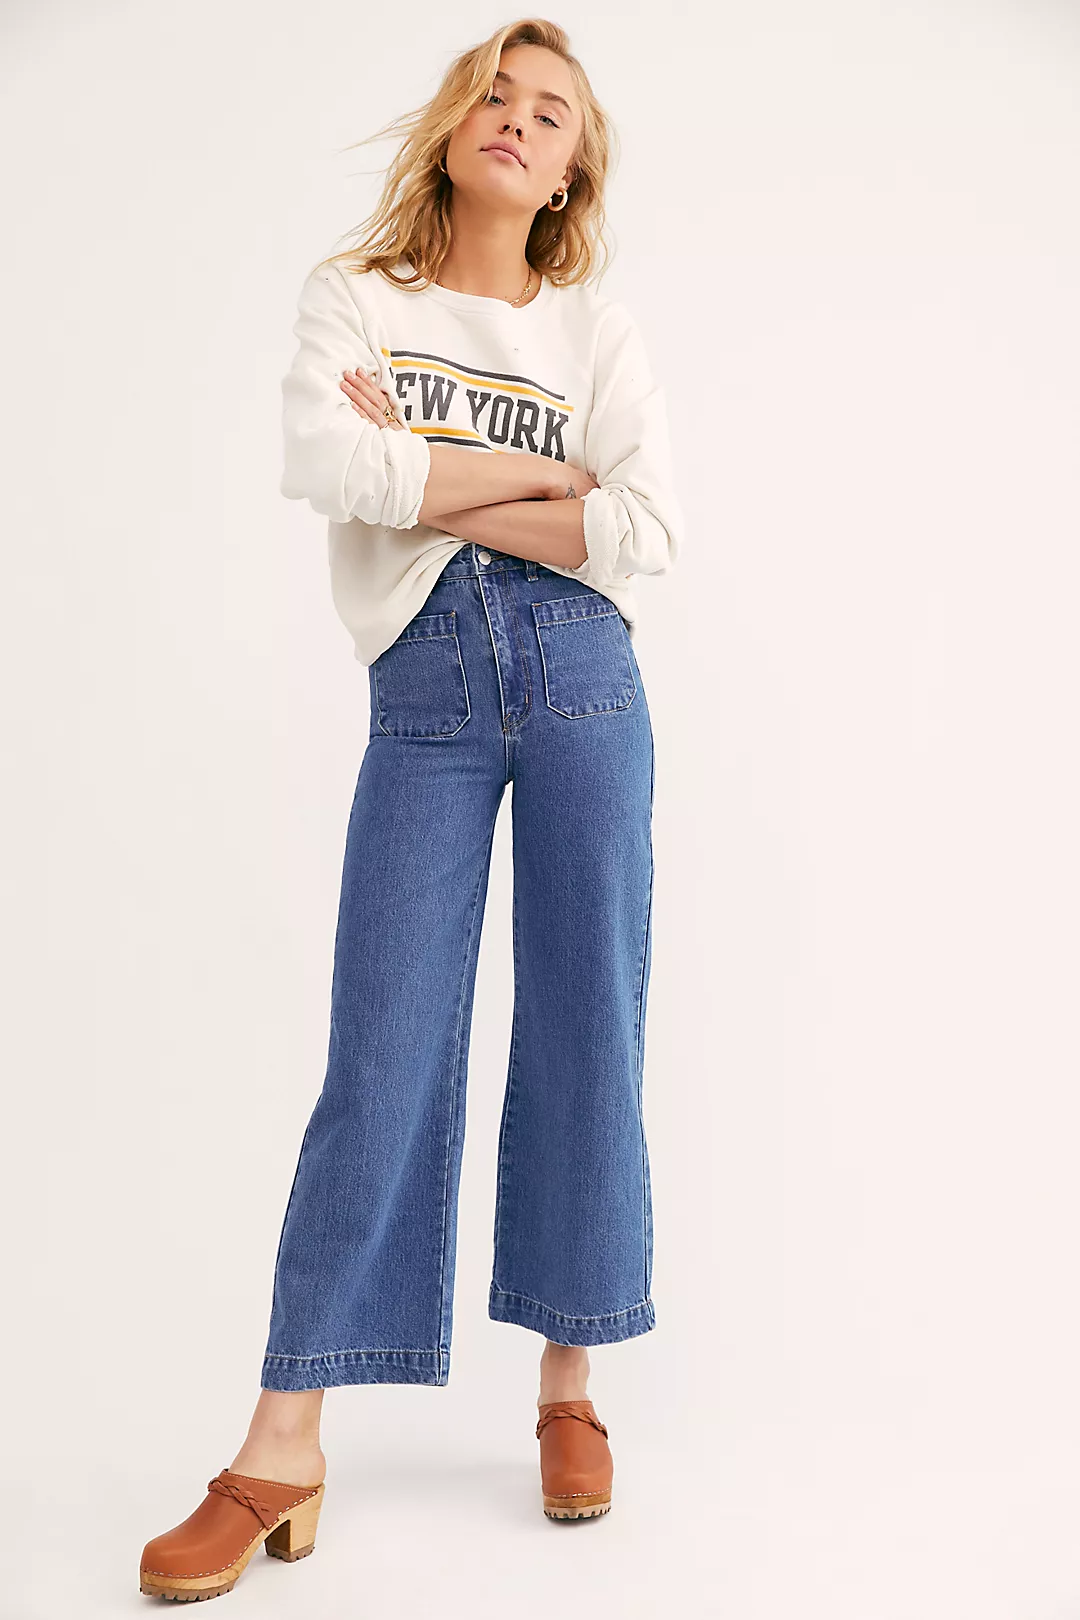 The Best High-Waisted Jeans To Shop Online 2021